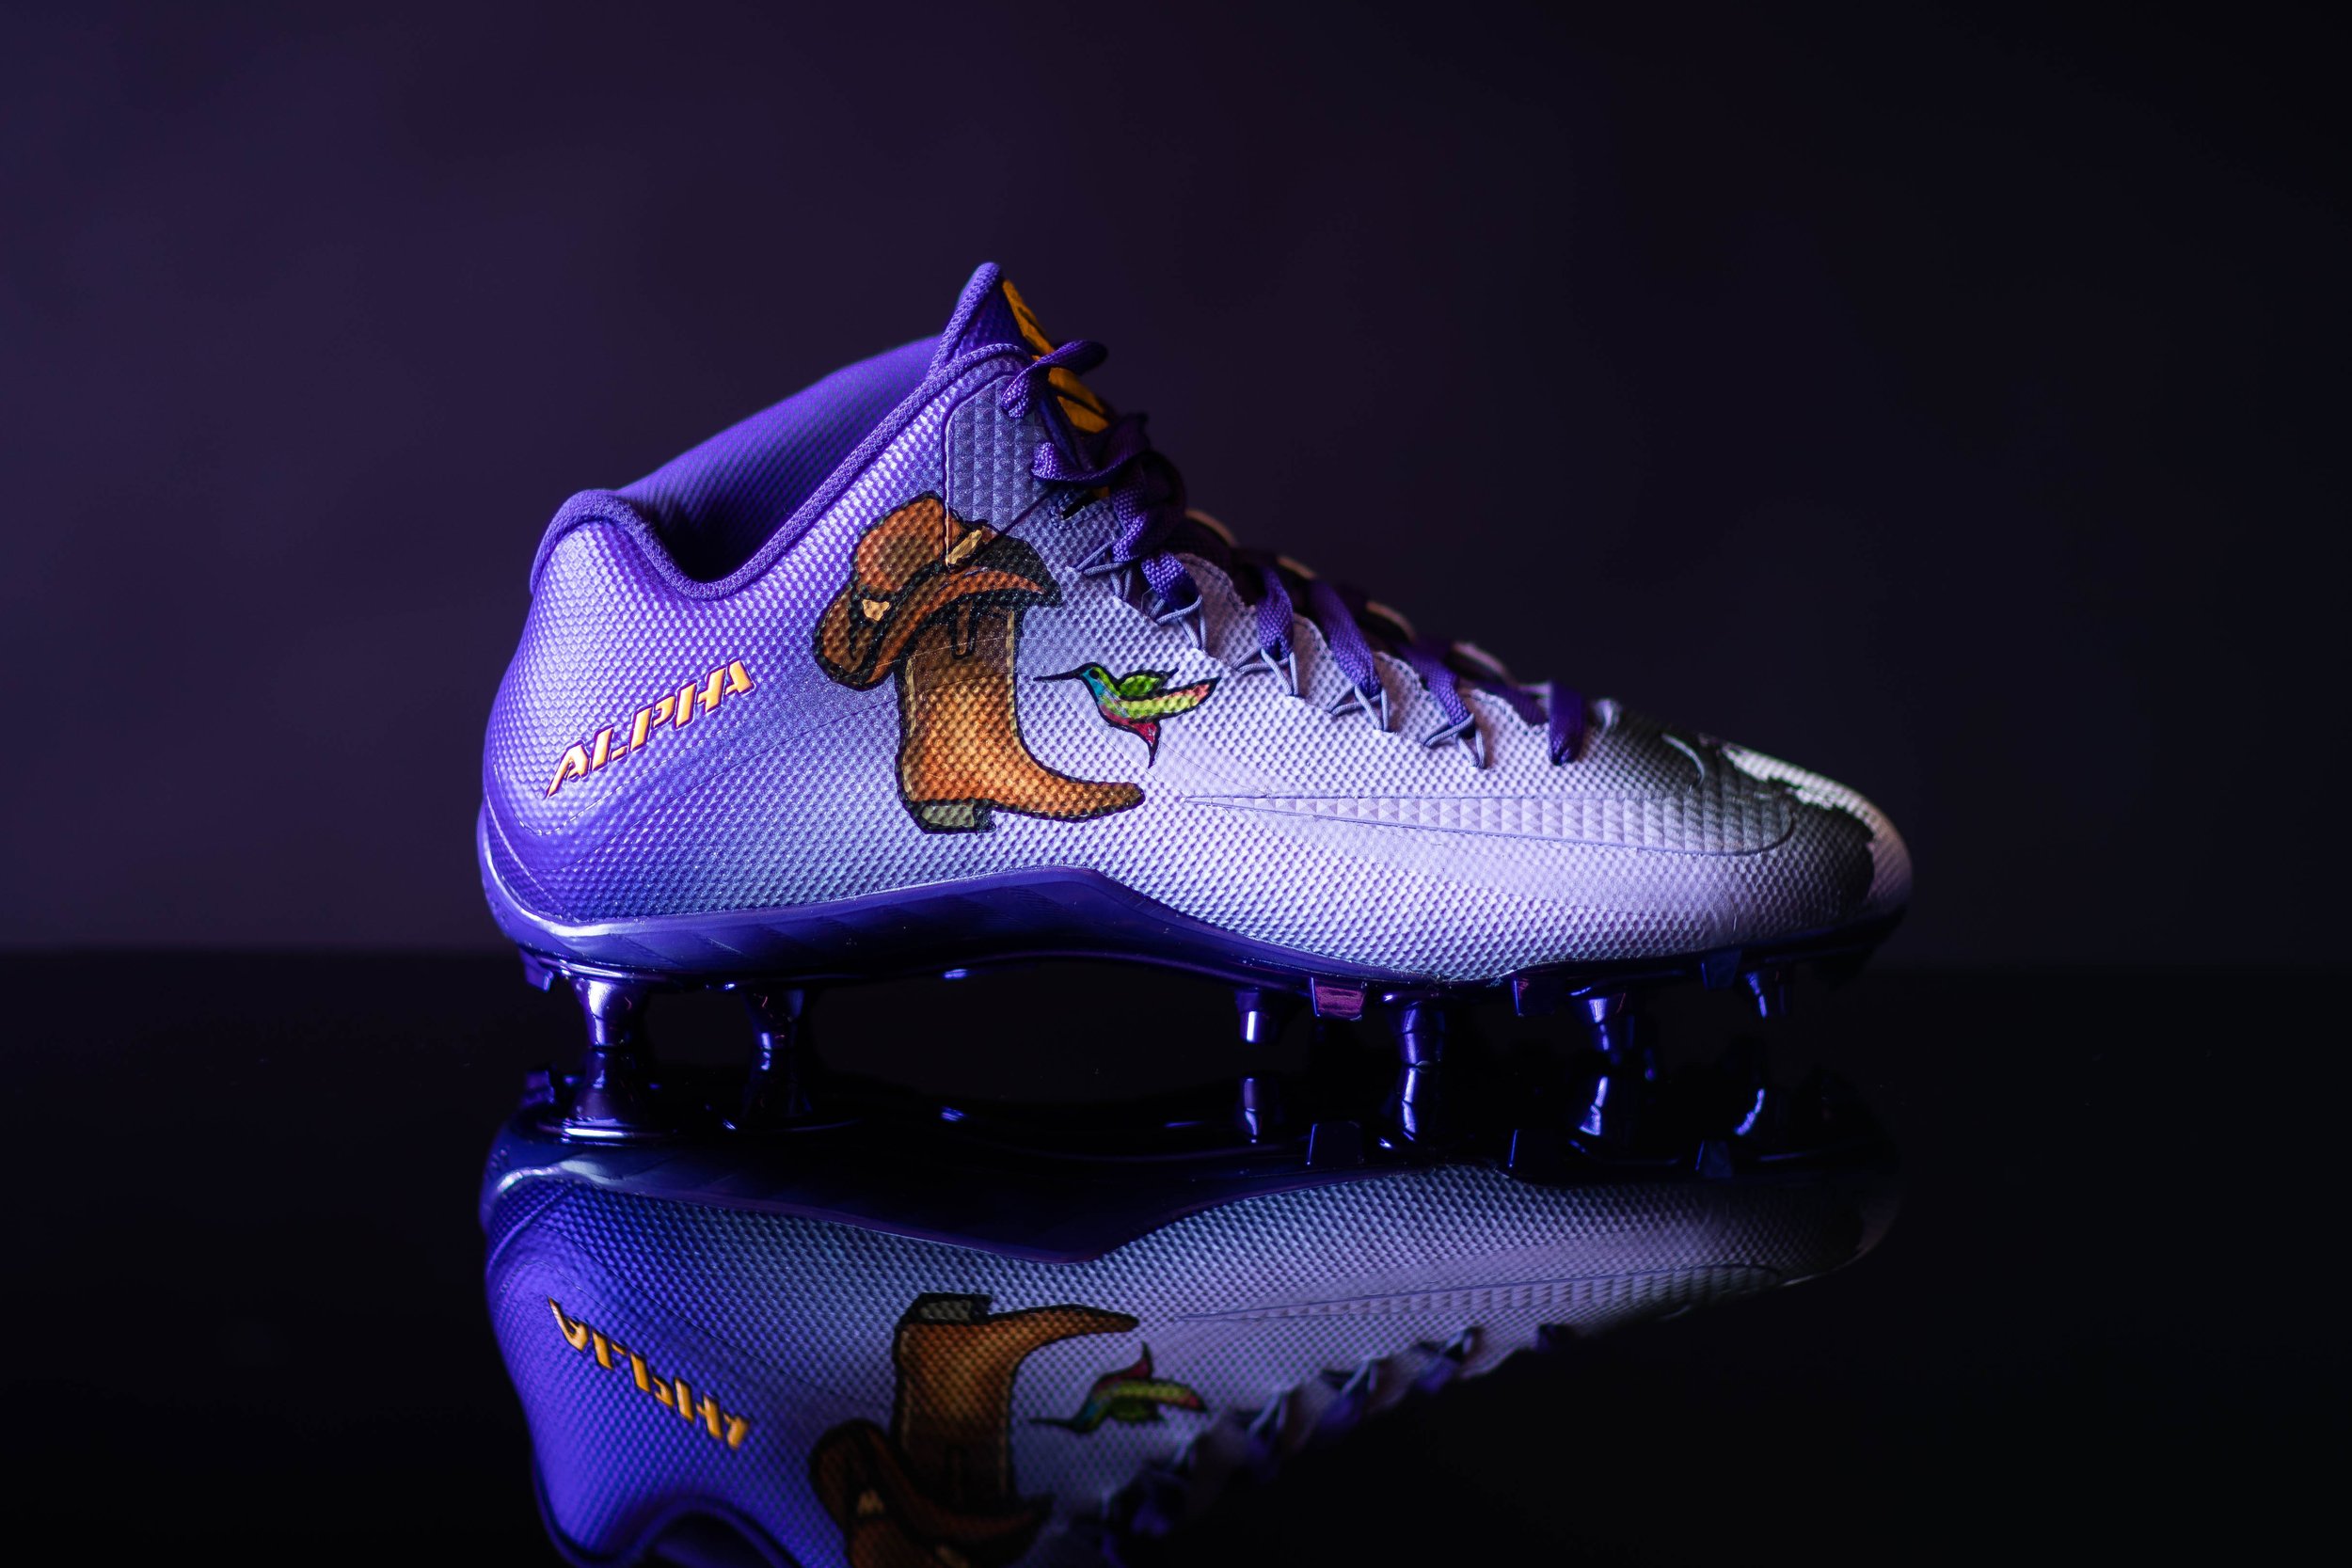  Tyler Conklin’s cleats. Charity: Dementia Society of America 